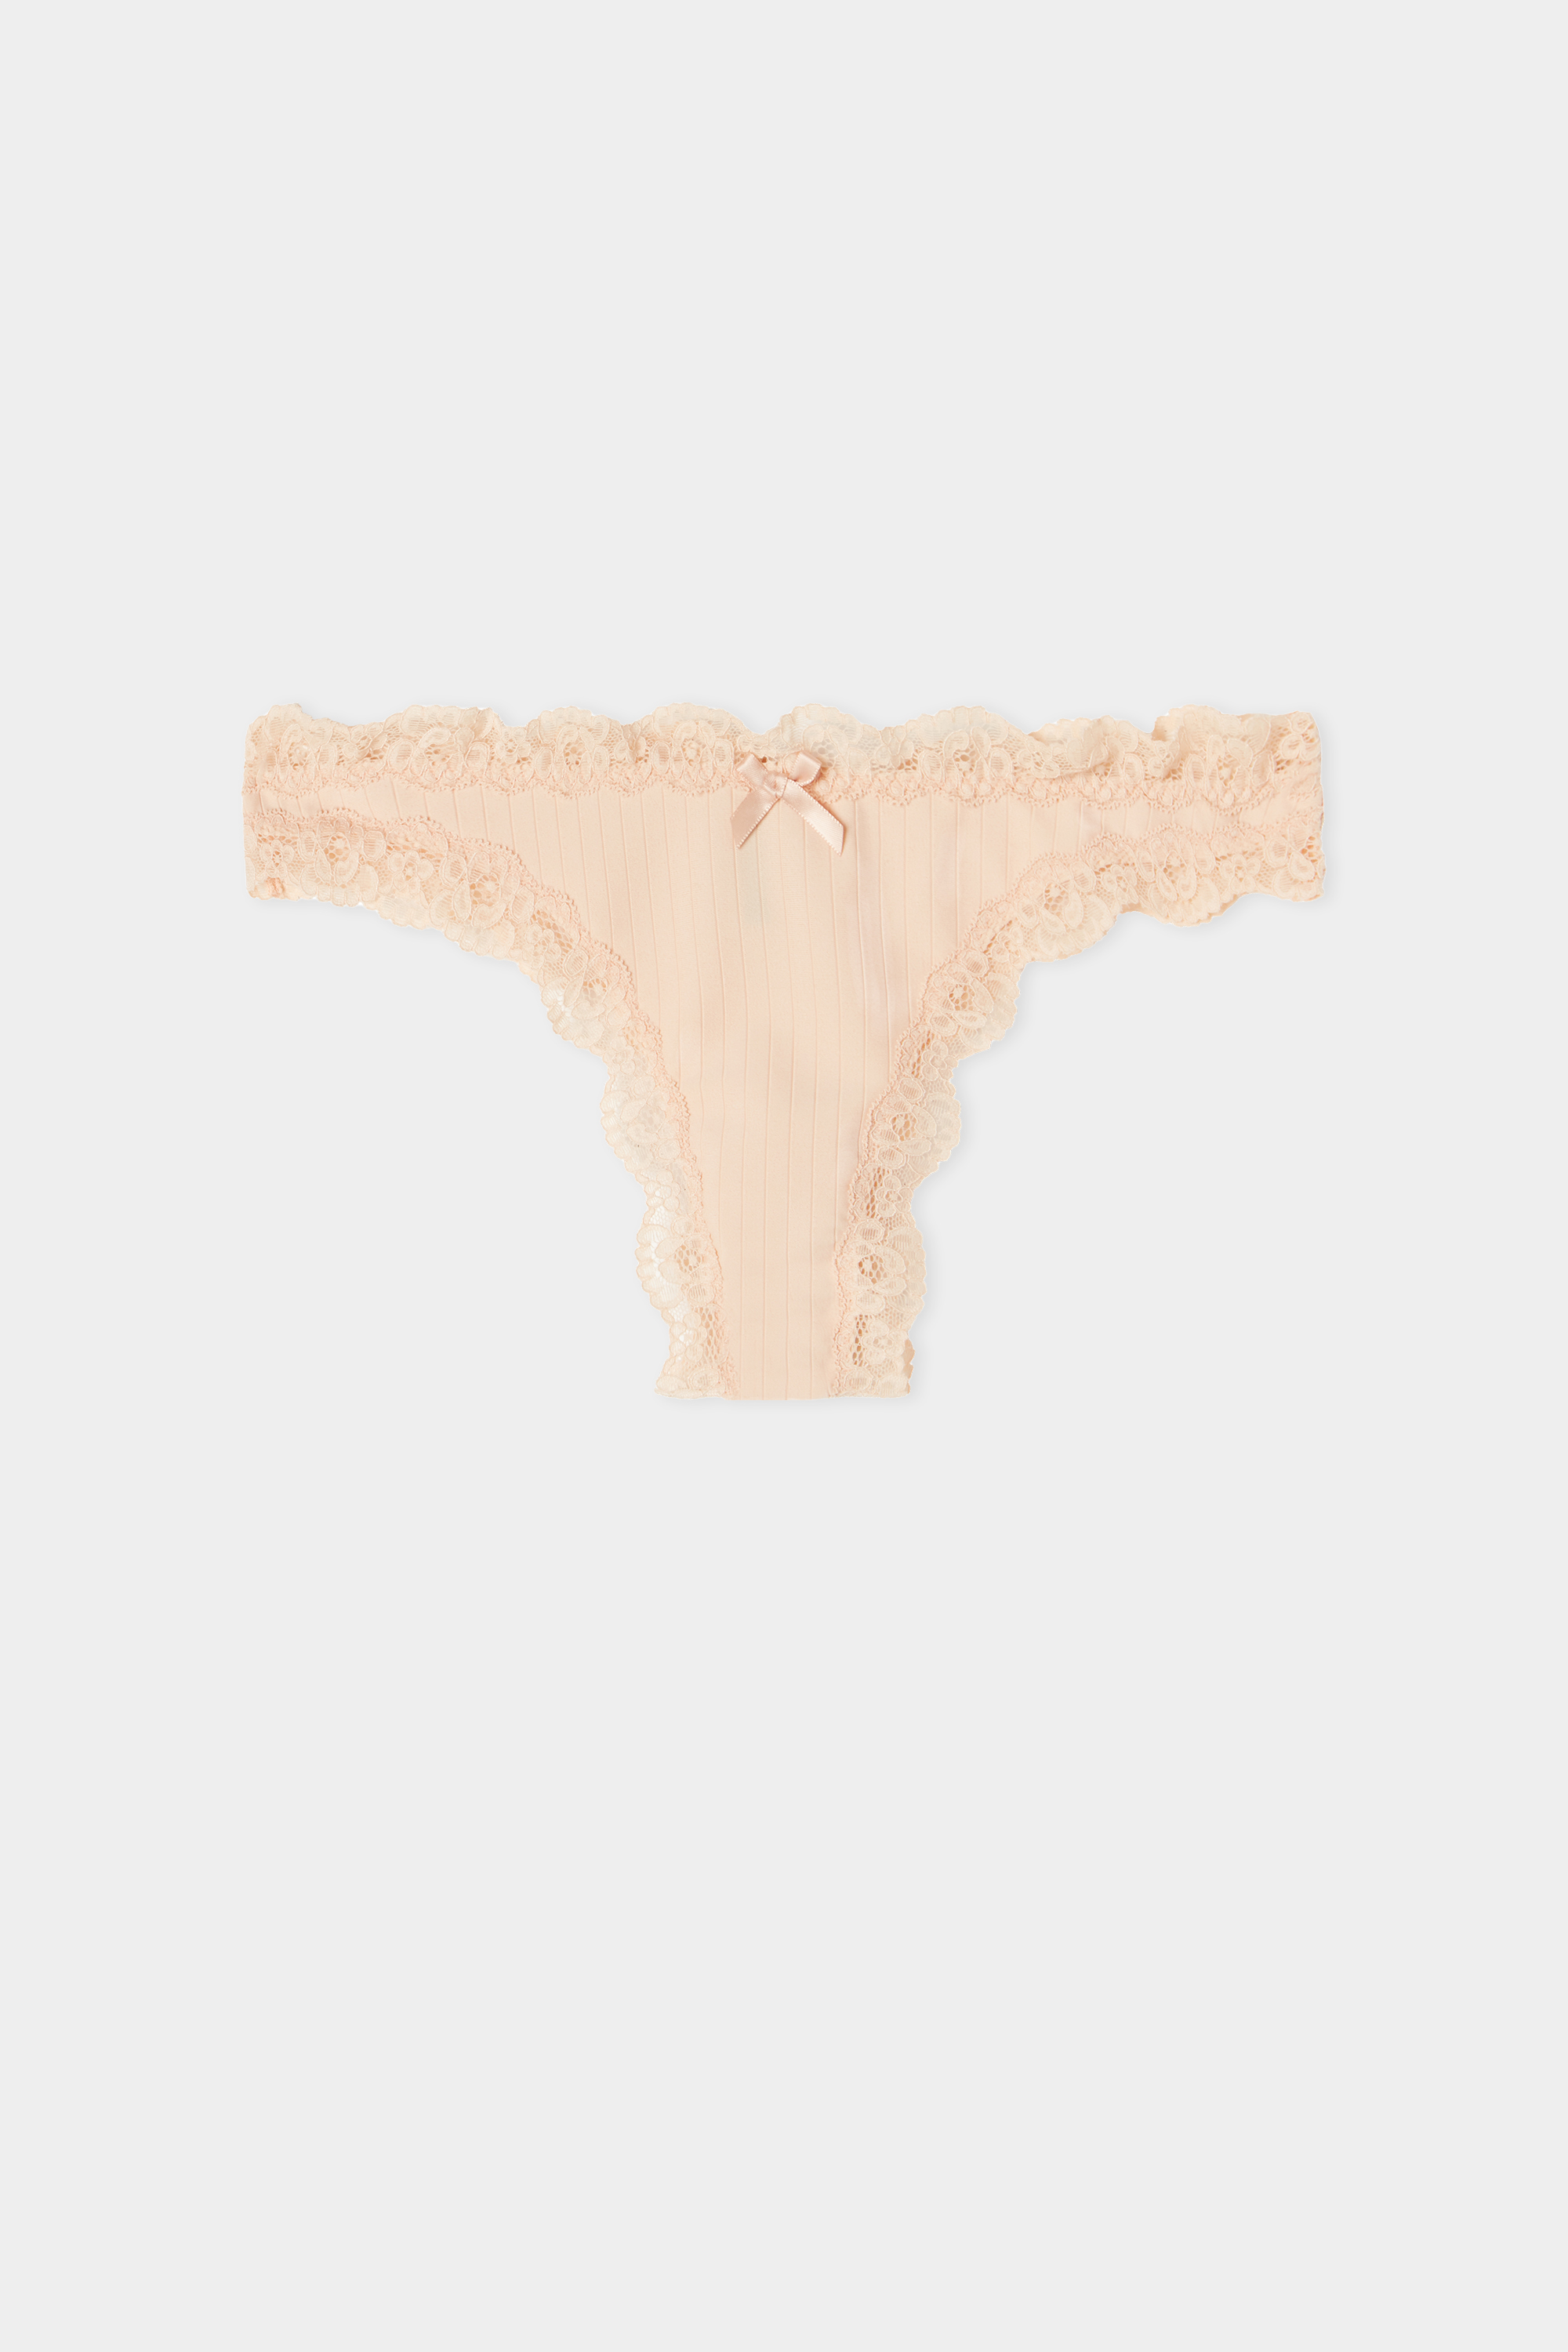 Ribbed Brazilian Briefs with Lace Trim